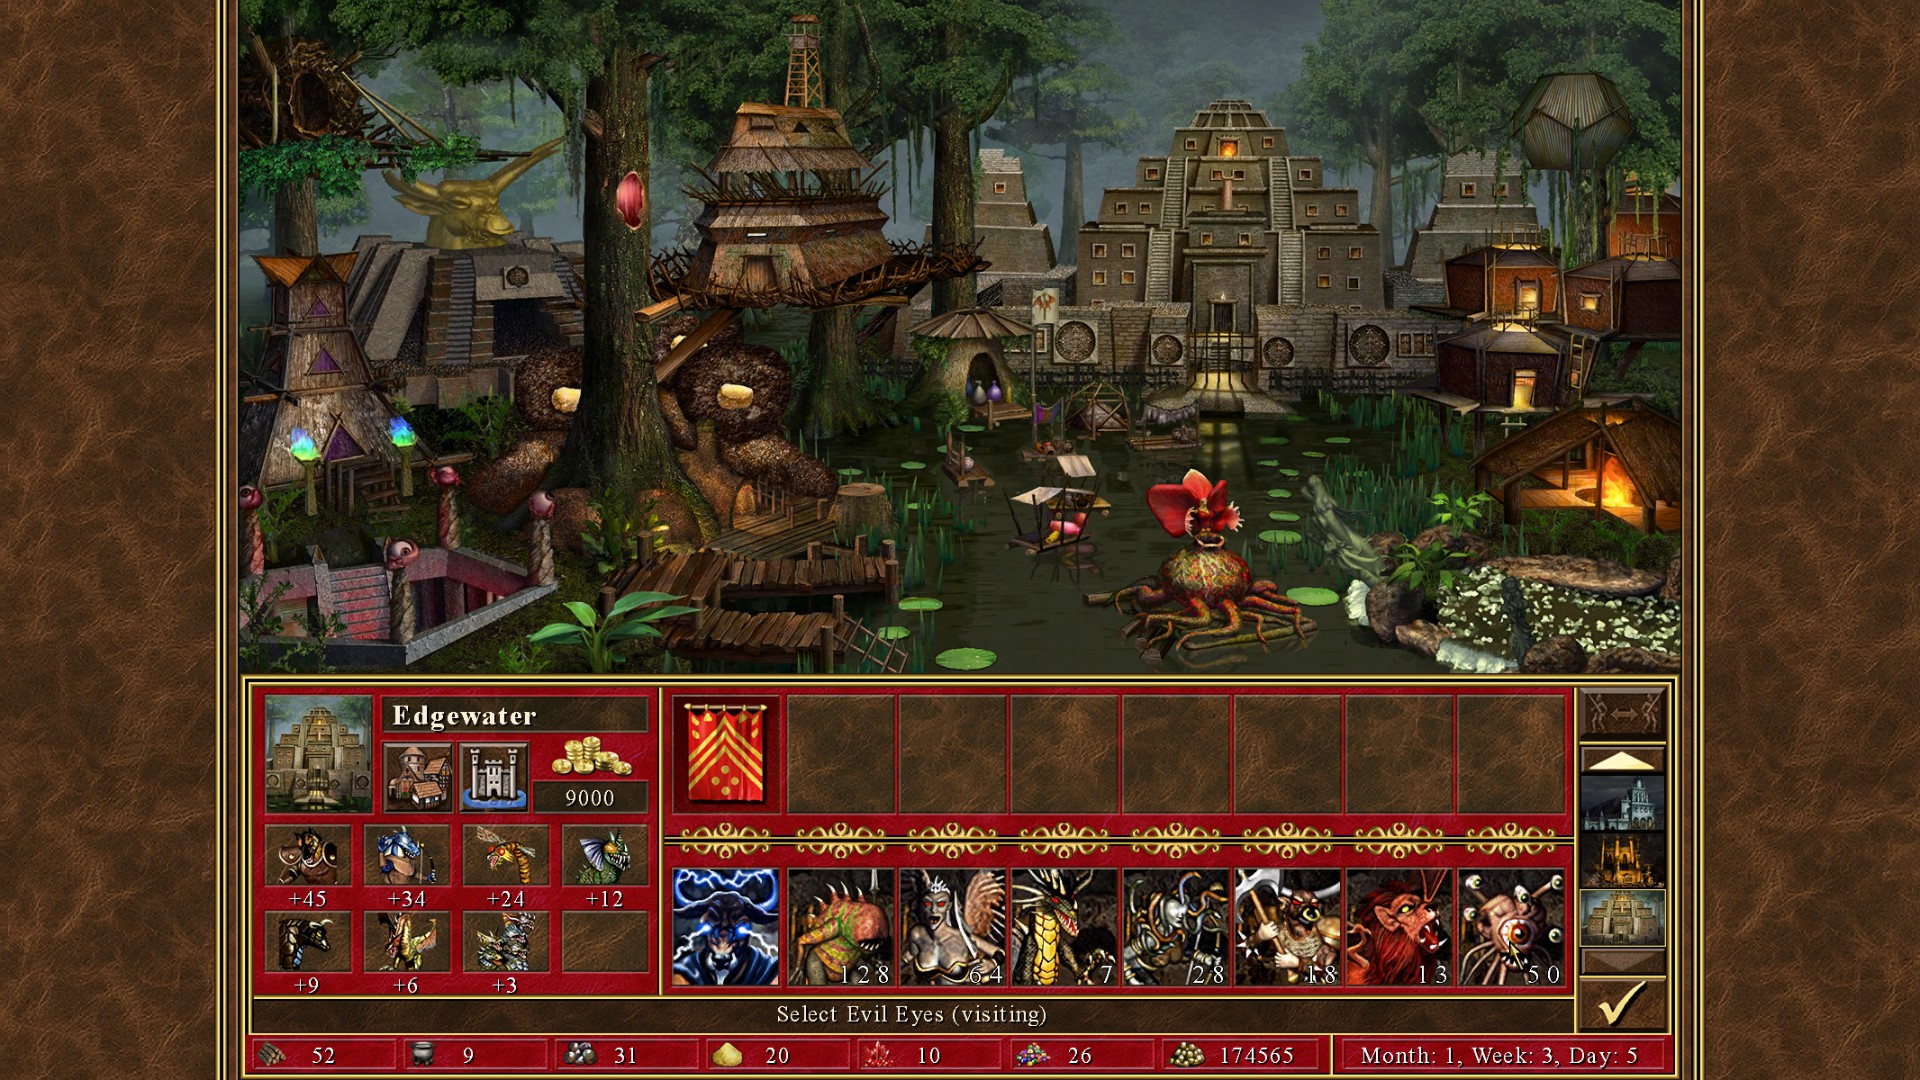 download games similar to heroes of might and magic 3